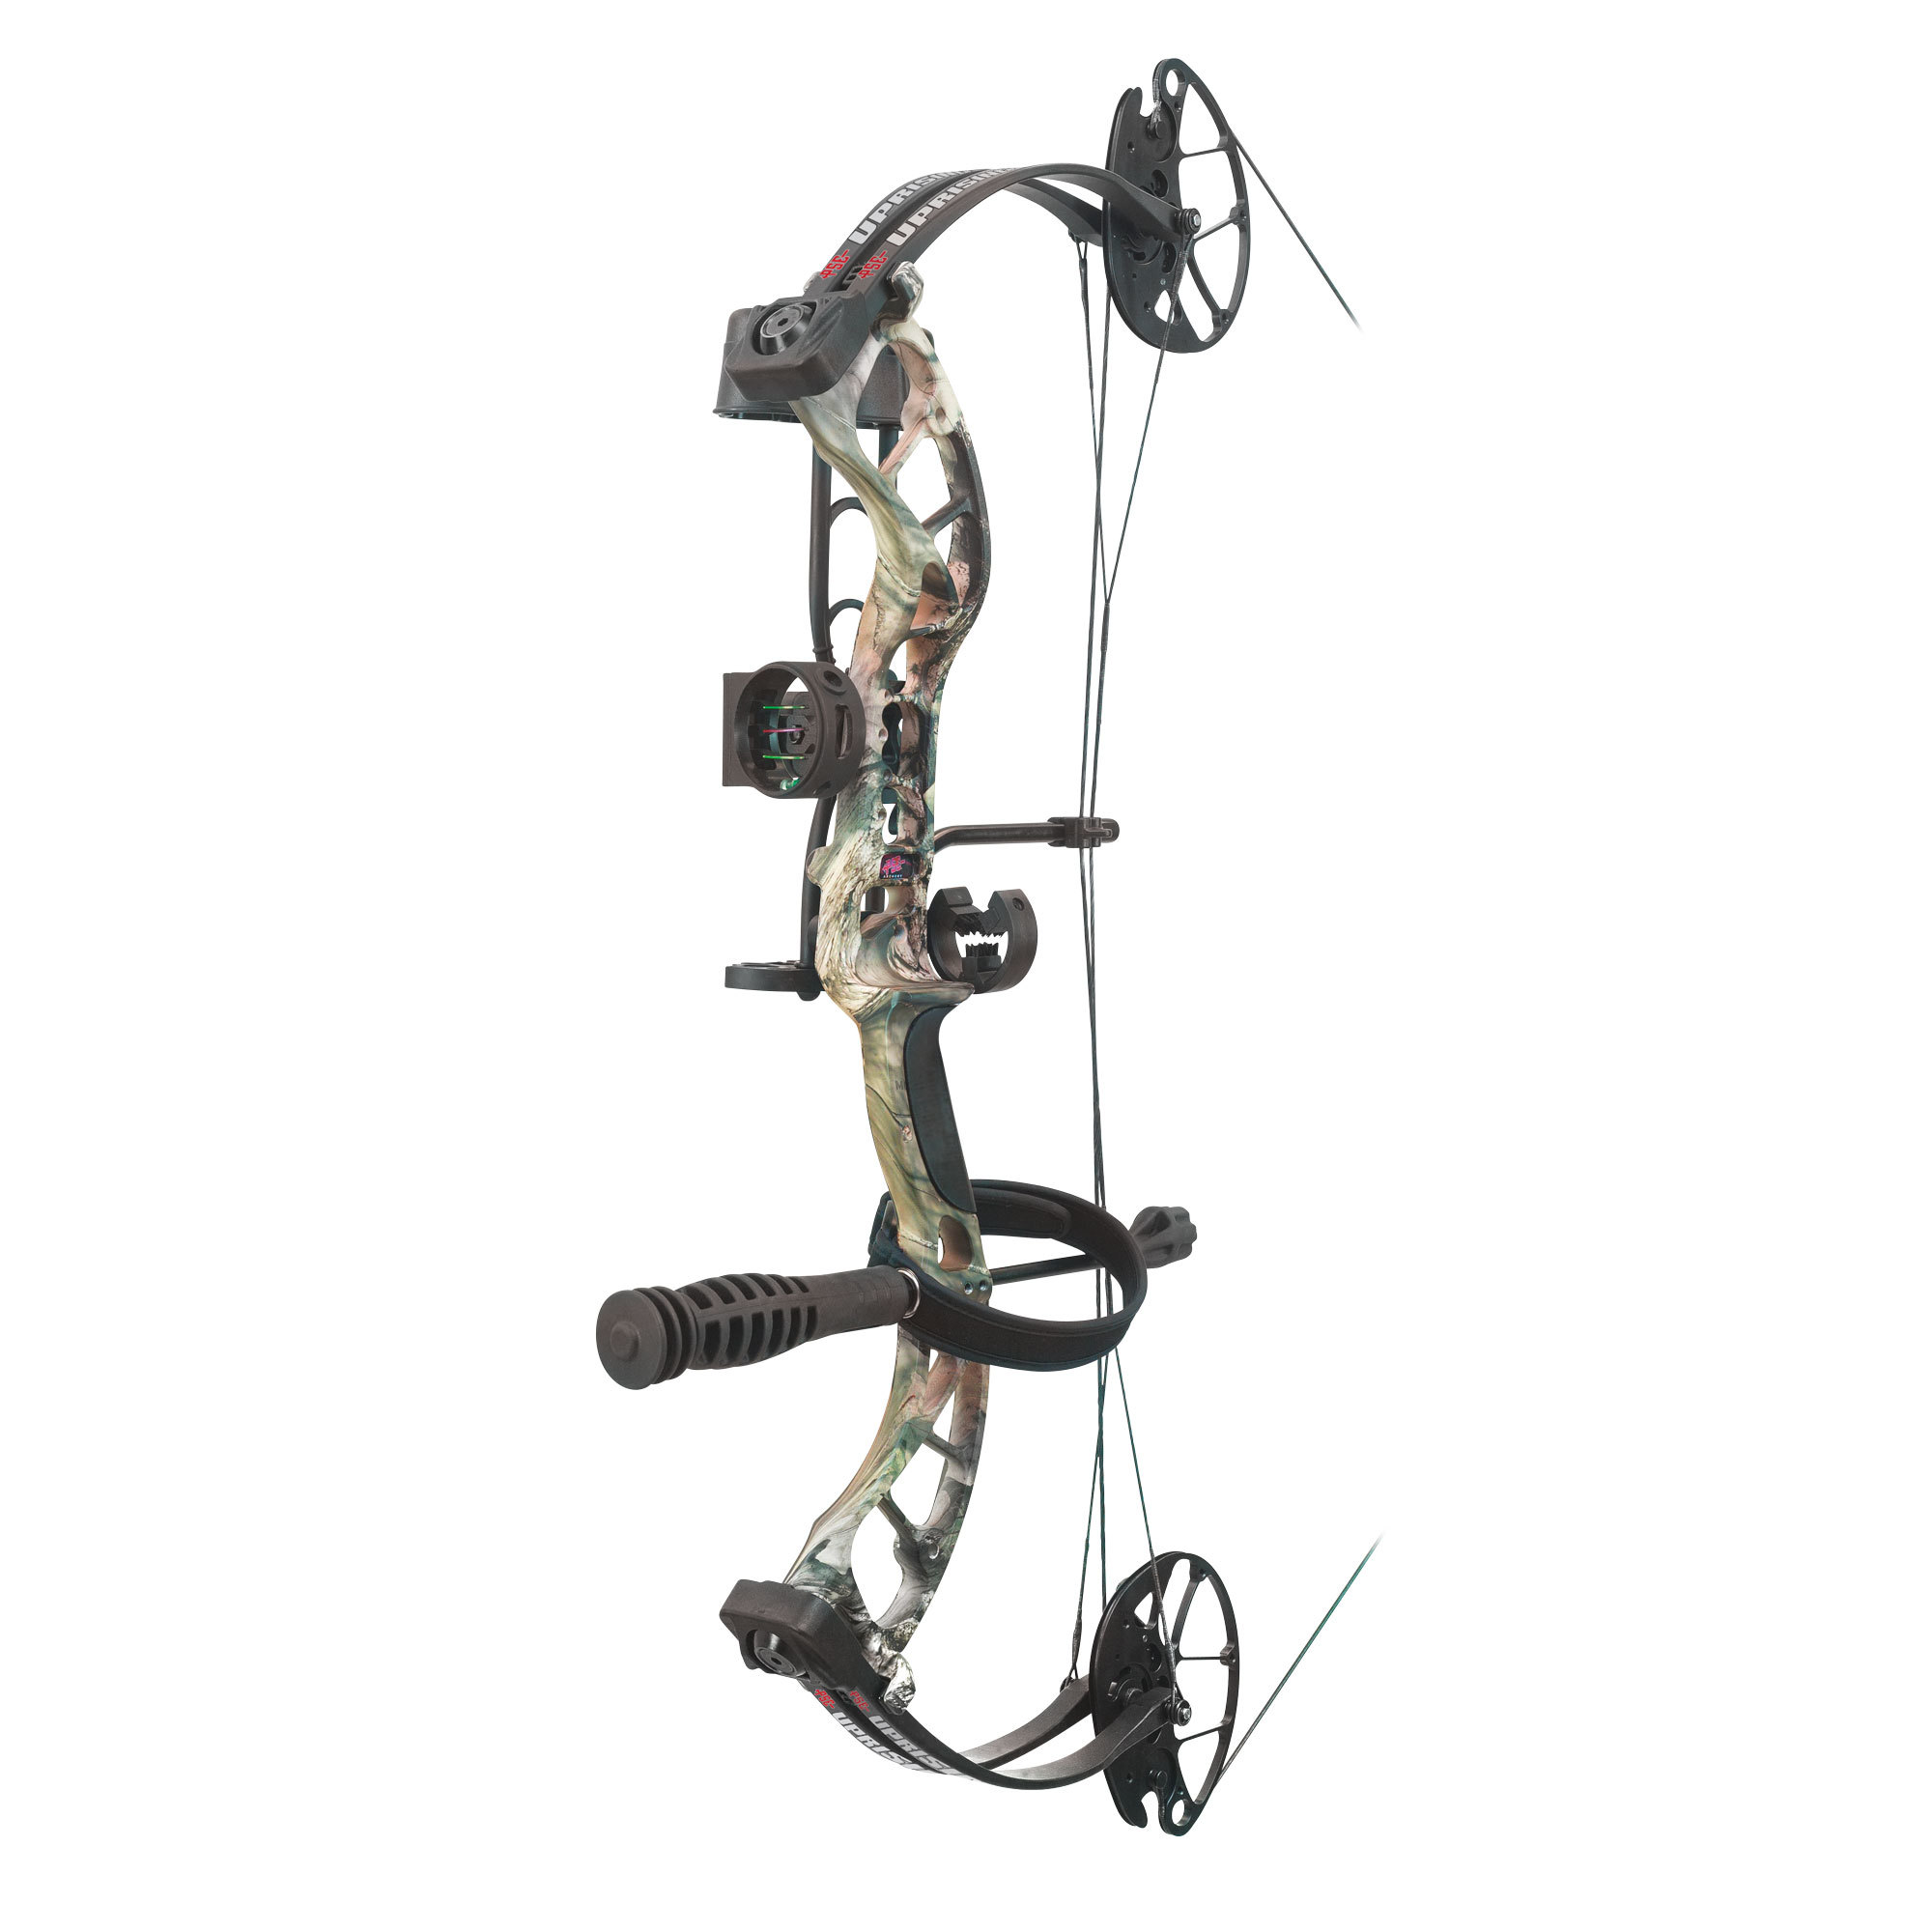 MEANV'S STRING SUPPRESSOR FITS BOWTECH INSANITY CPX in BLACK CARBON FIBER FINISH 